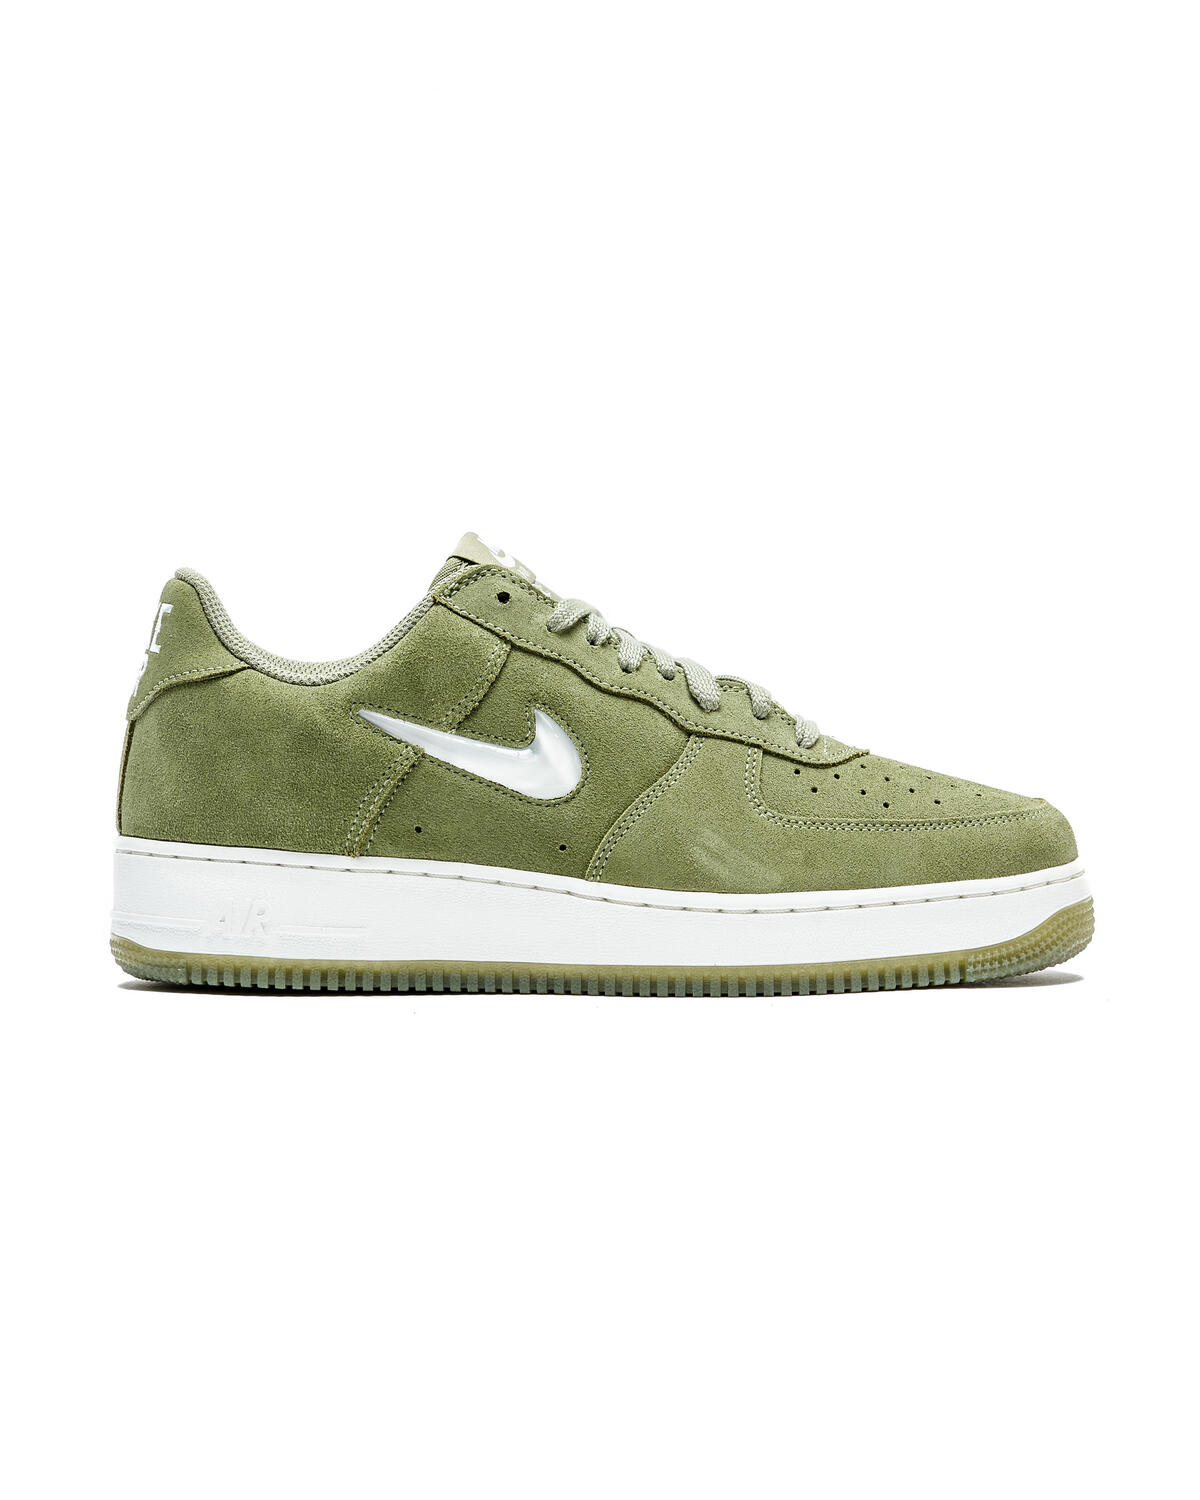 Nike Men's Air Force 1 07 LV8 Suede Basketball Shoes (10.5)